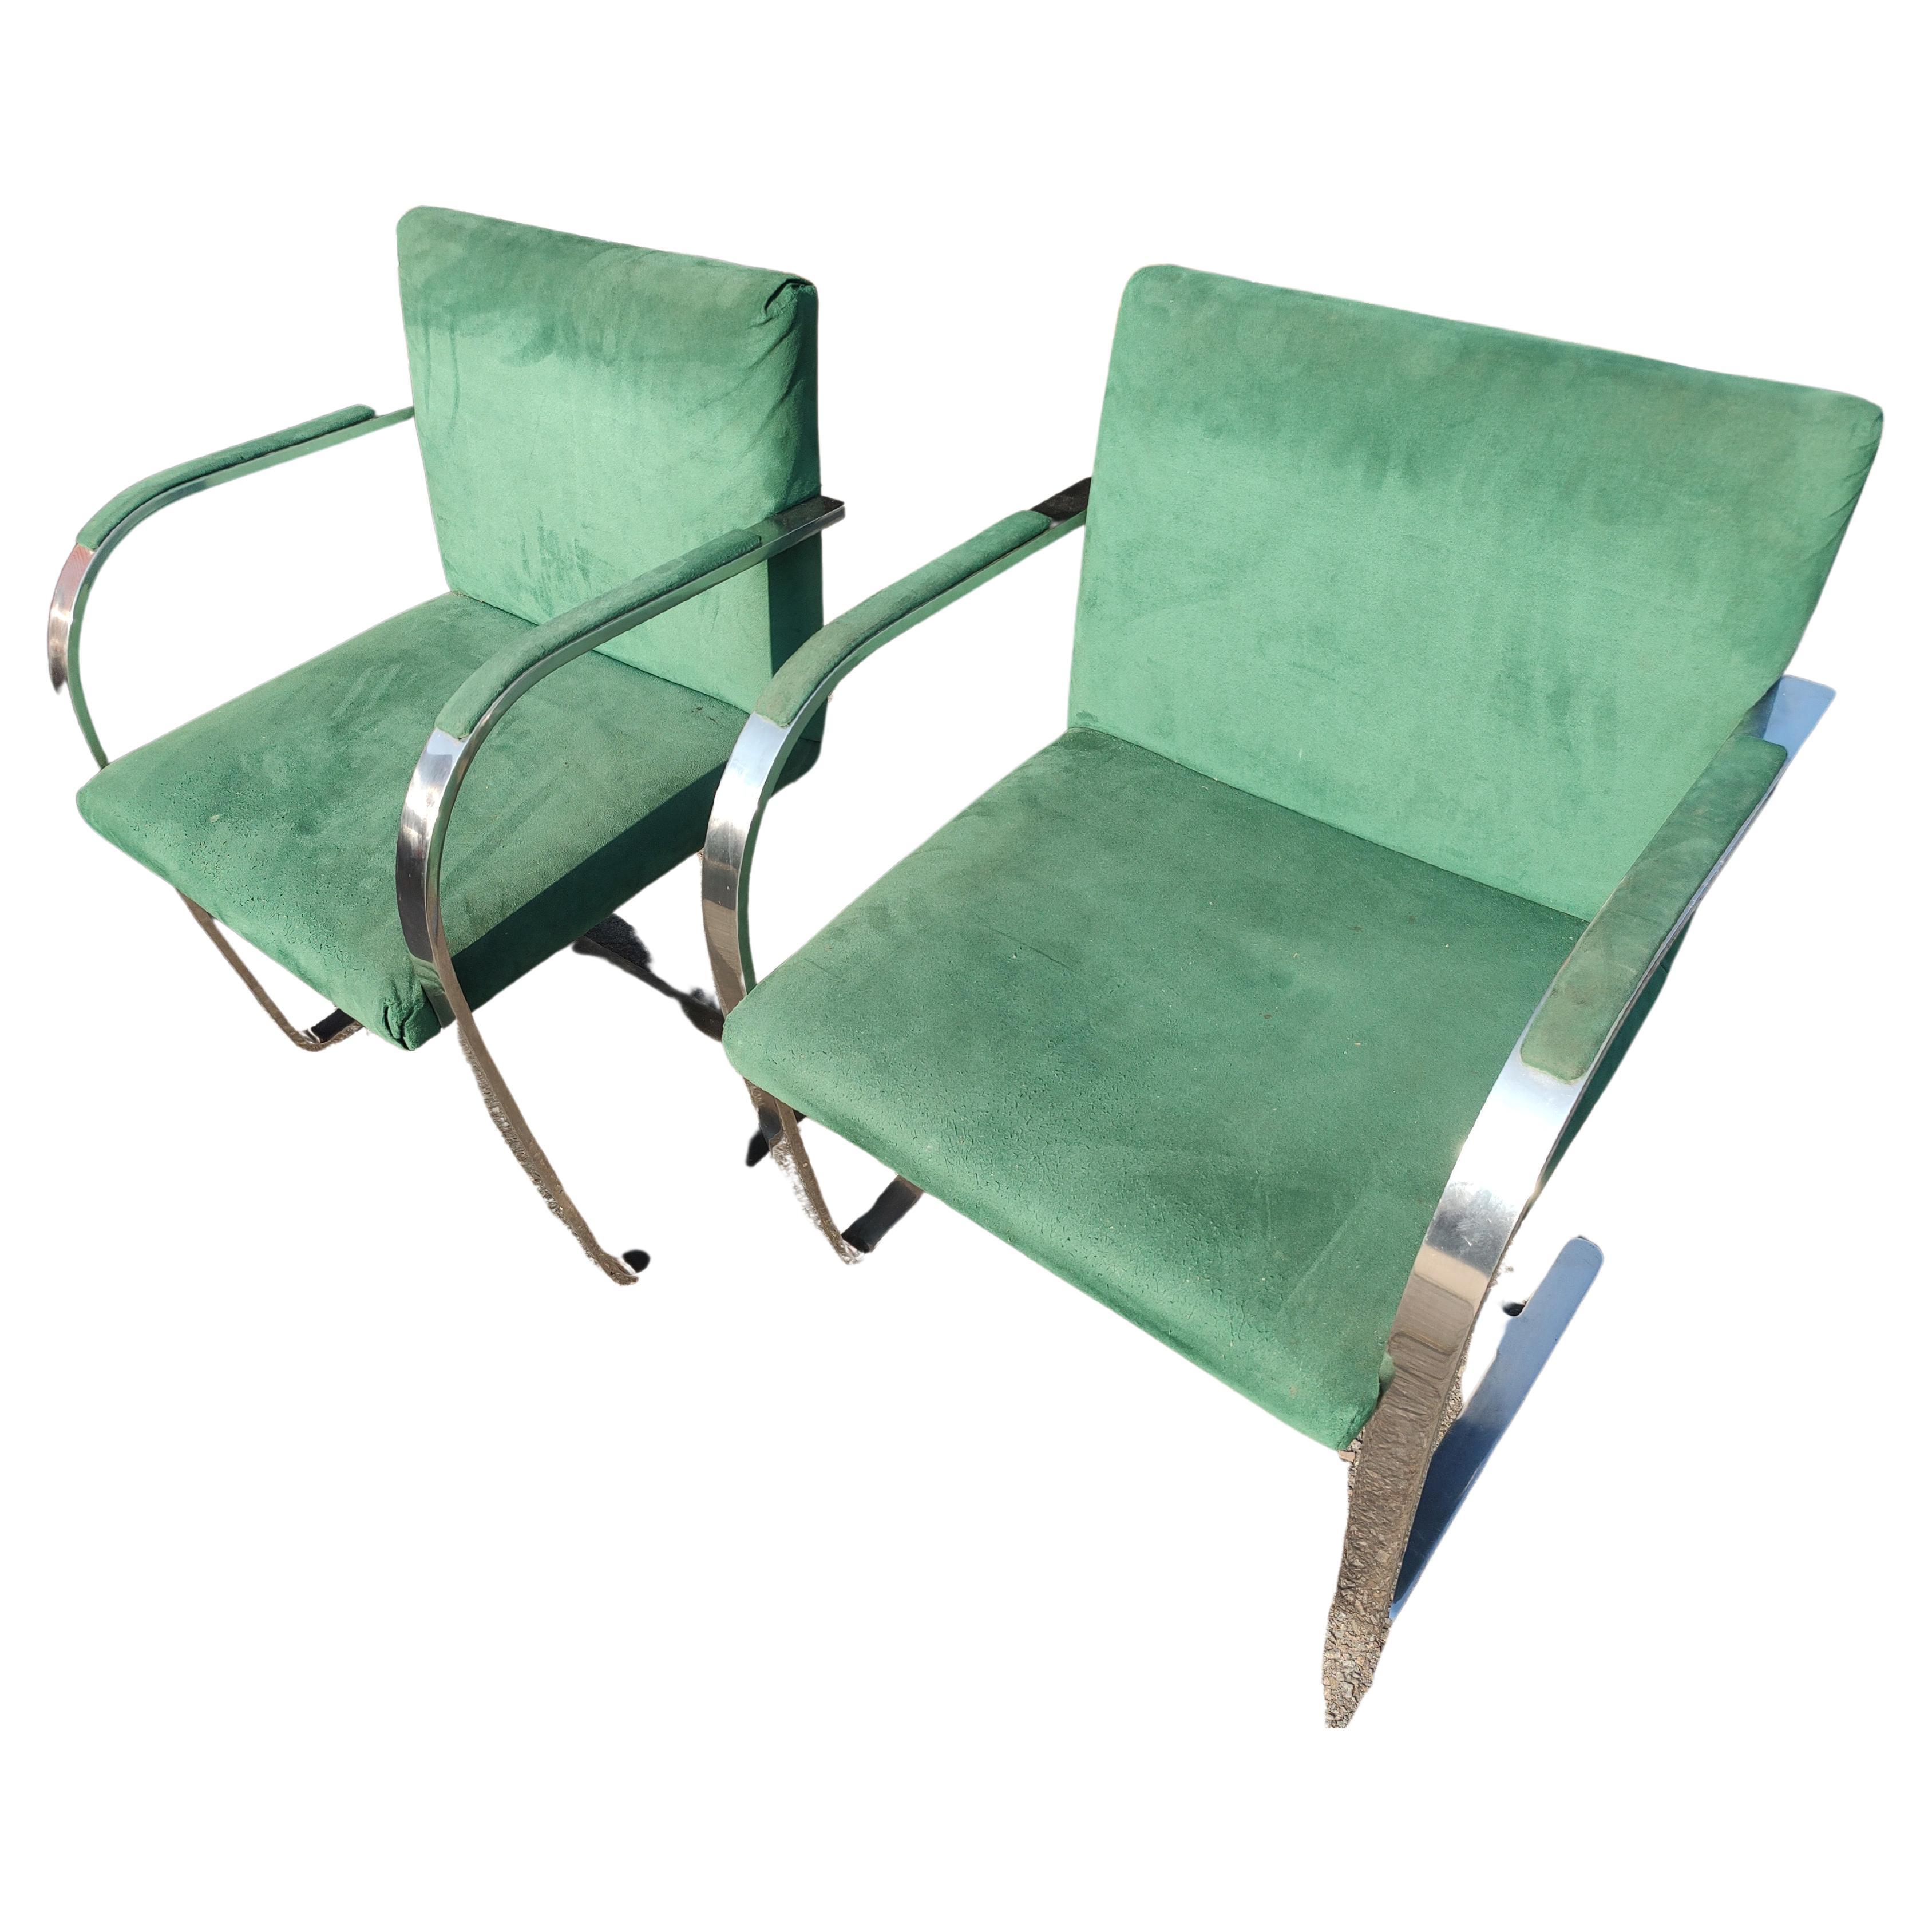 Pair of Mid Century Modern Bauhaus Styled Brno Chairs  Ludwig Mies van DerRohe  In Good Condition For Sale In Port Jervis, NY